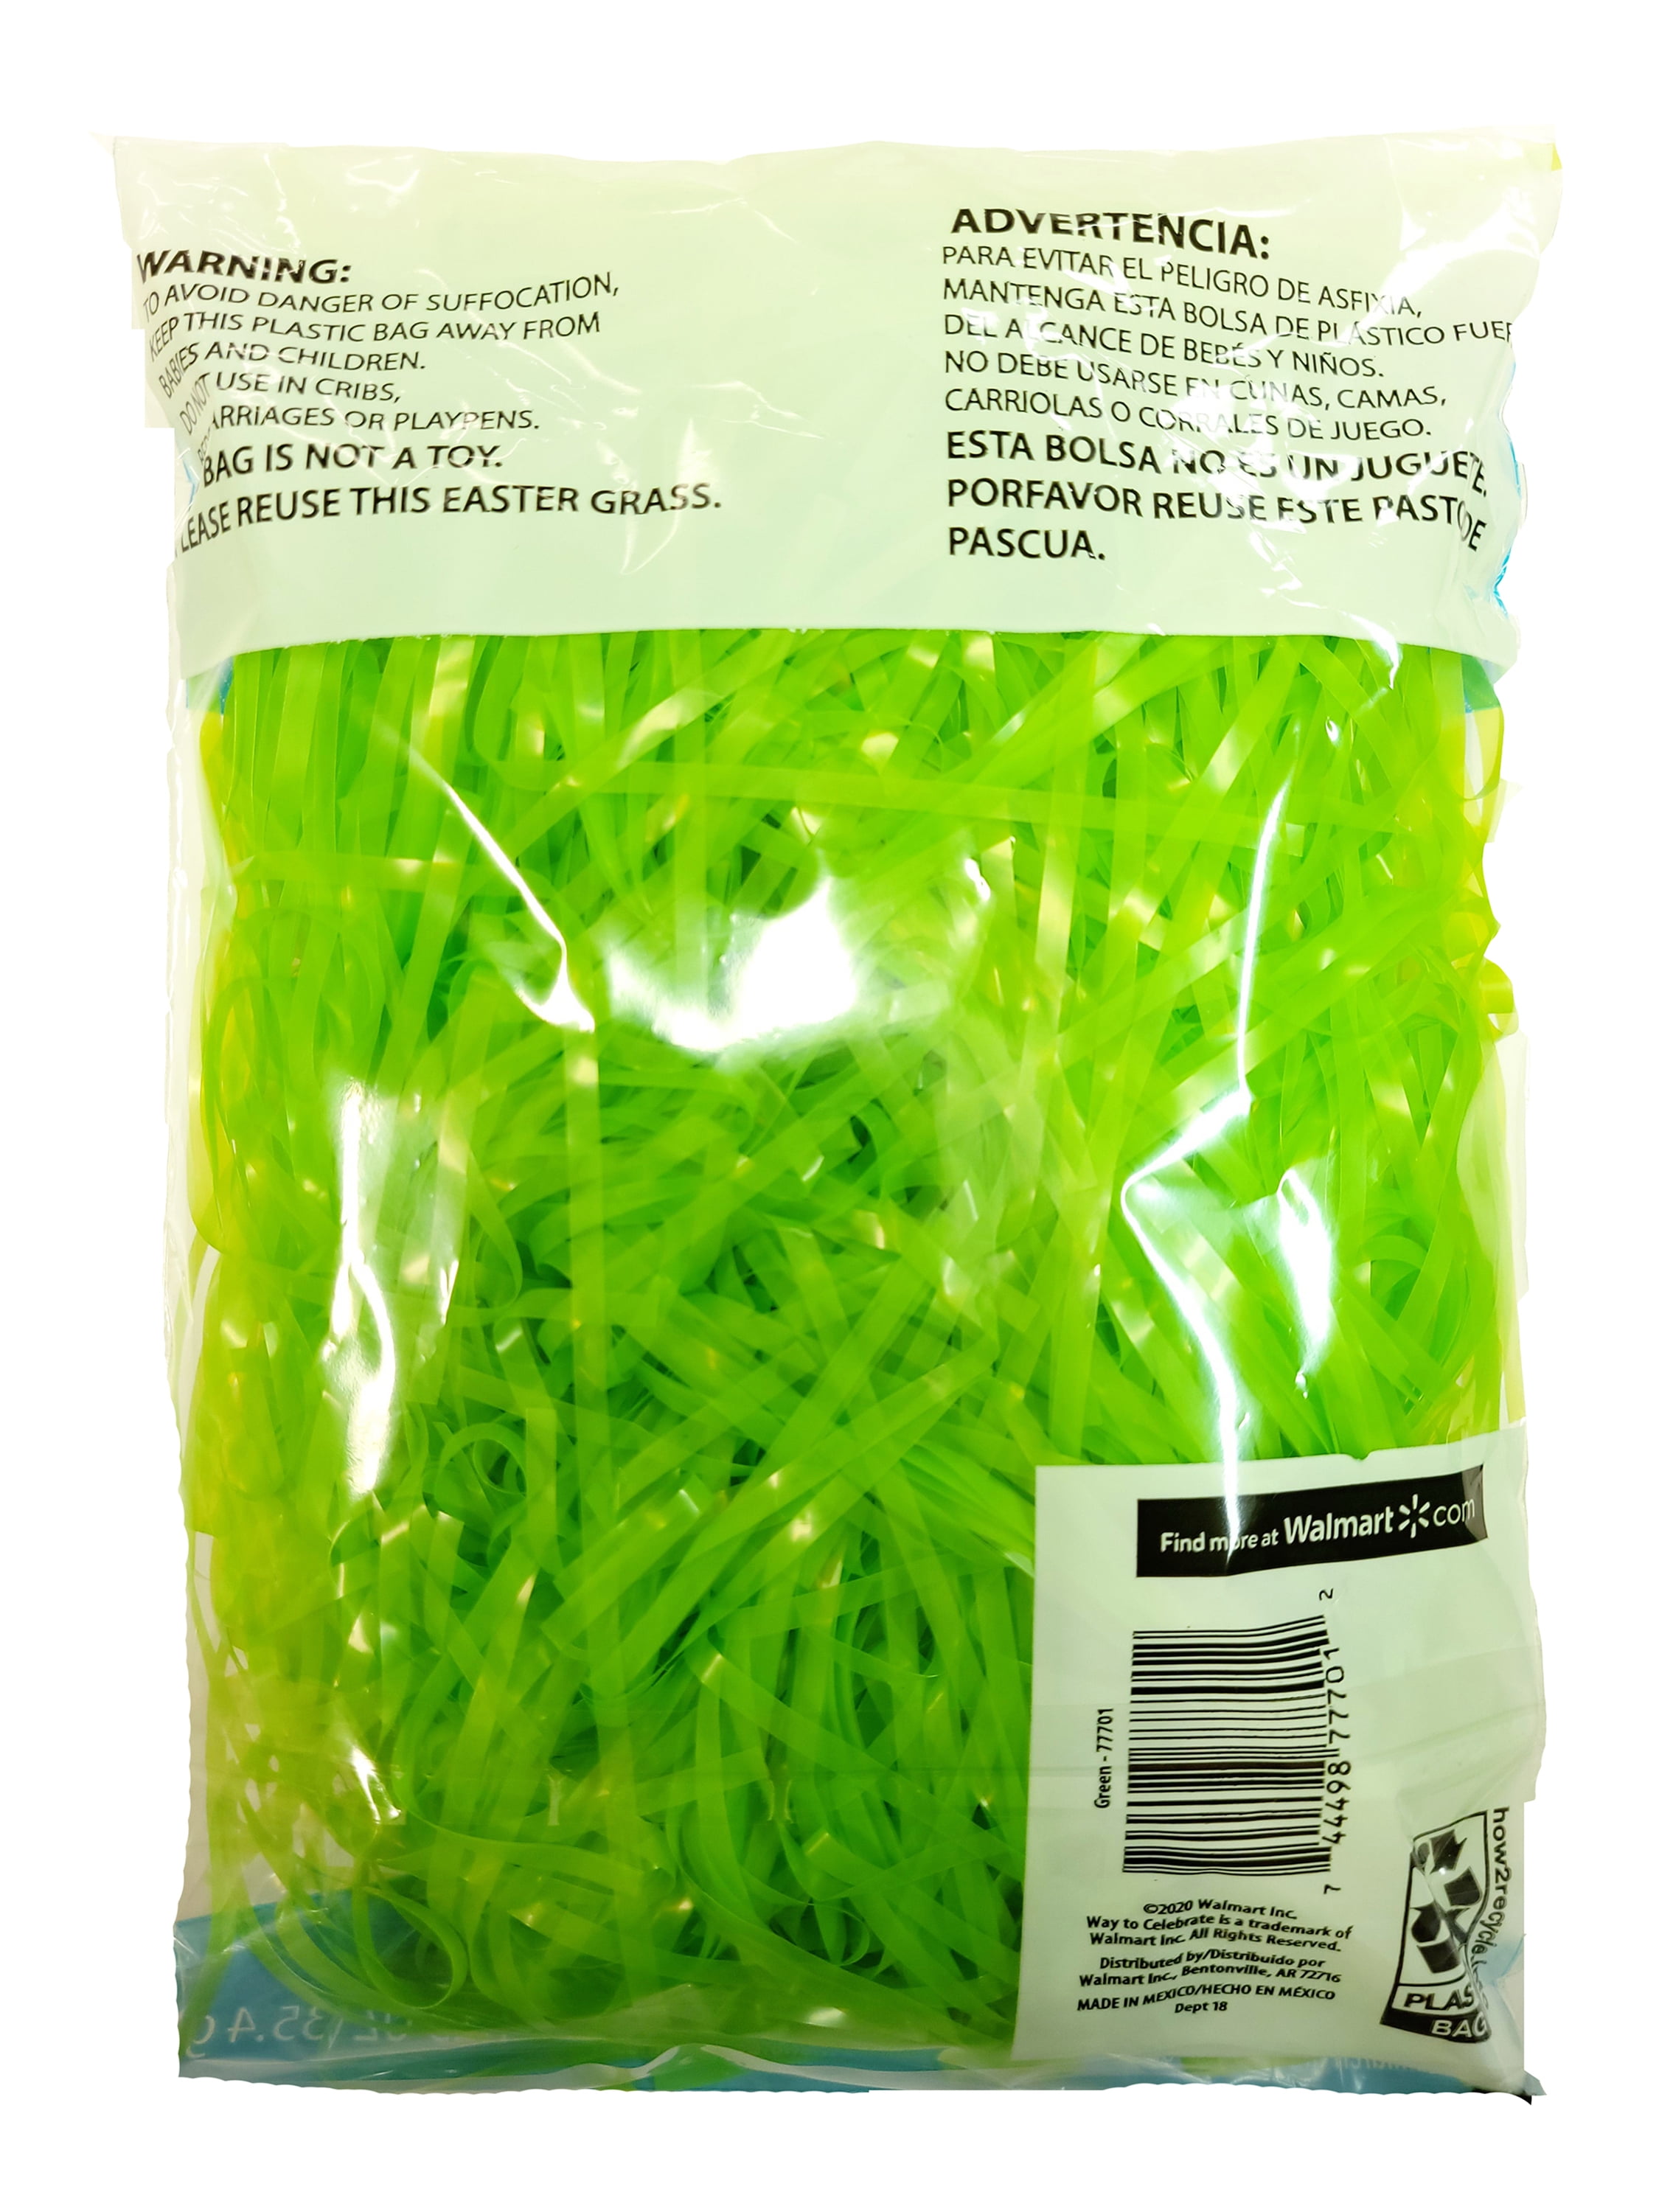 Way To Celebrate Easter Neon Blue Plastic Easter Grass, 3 oz